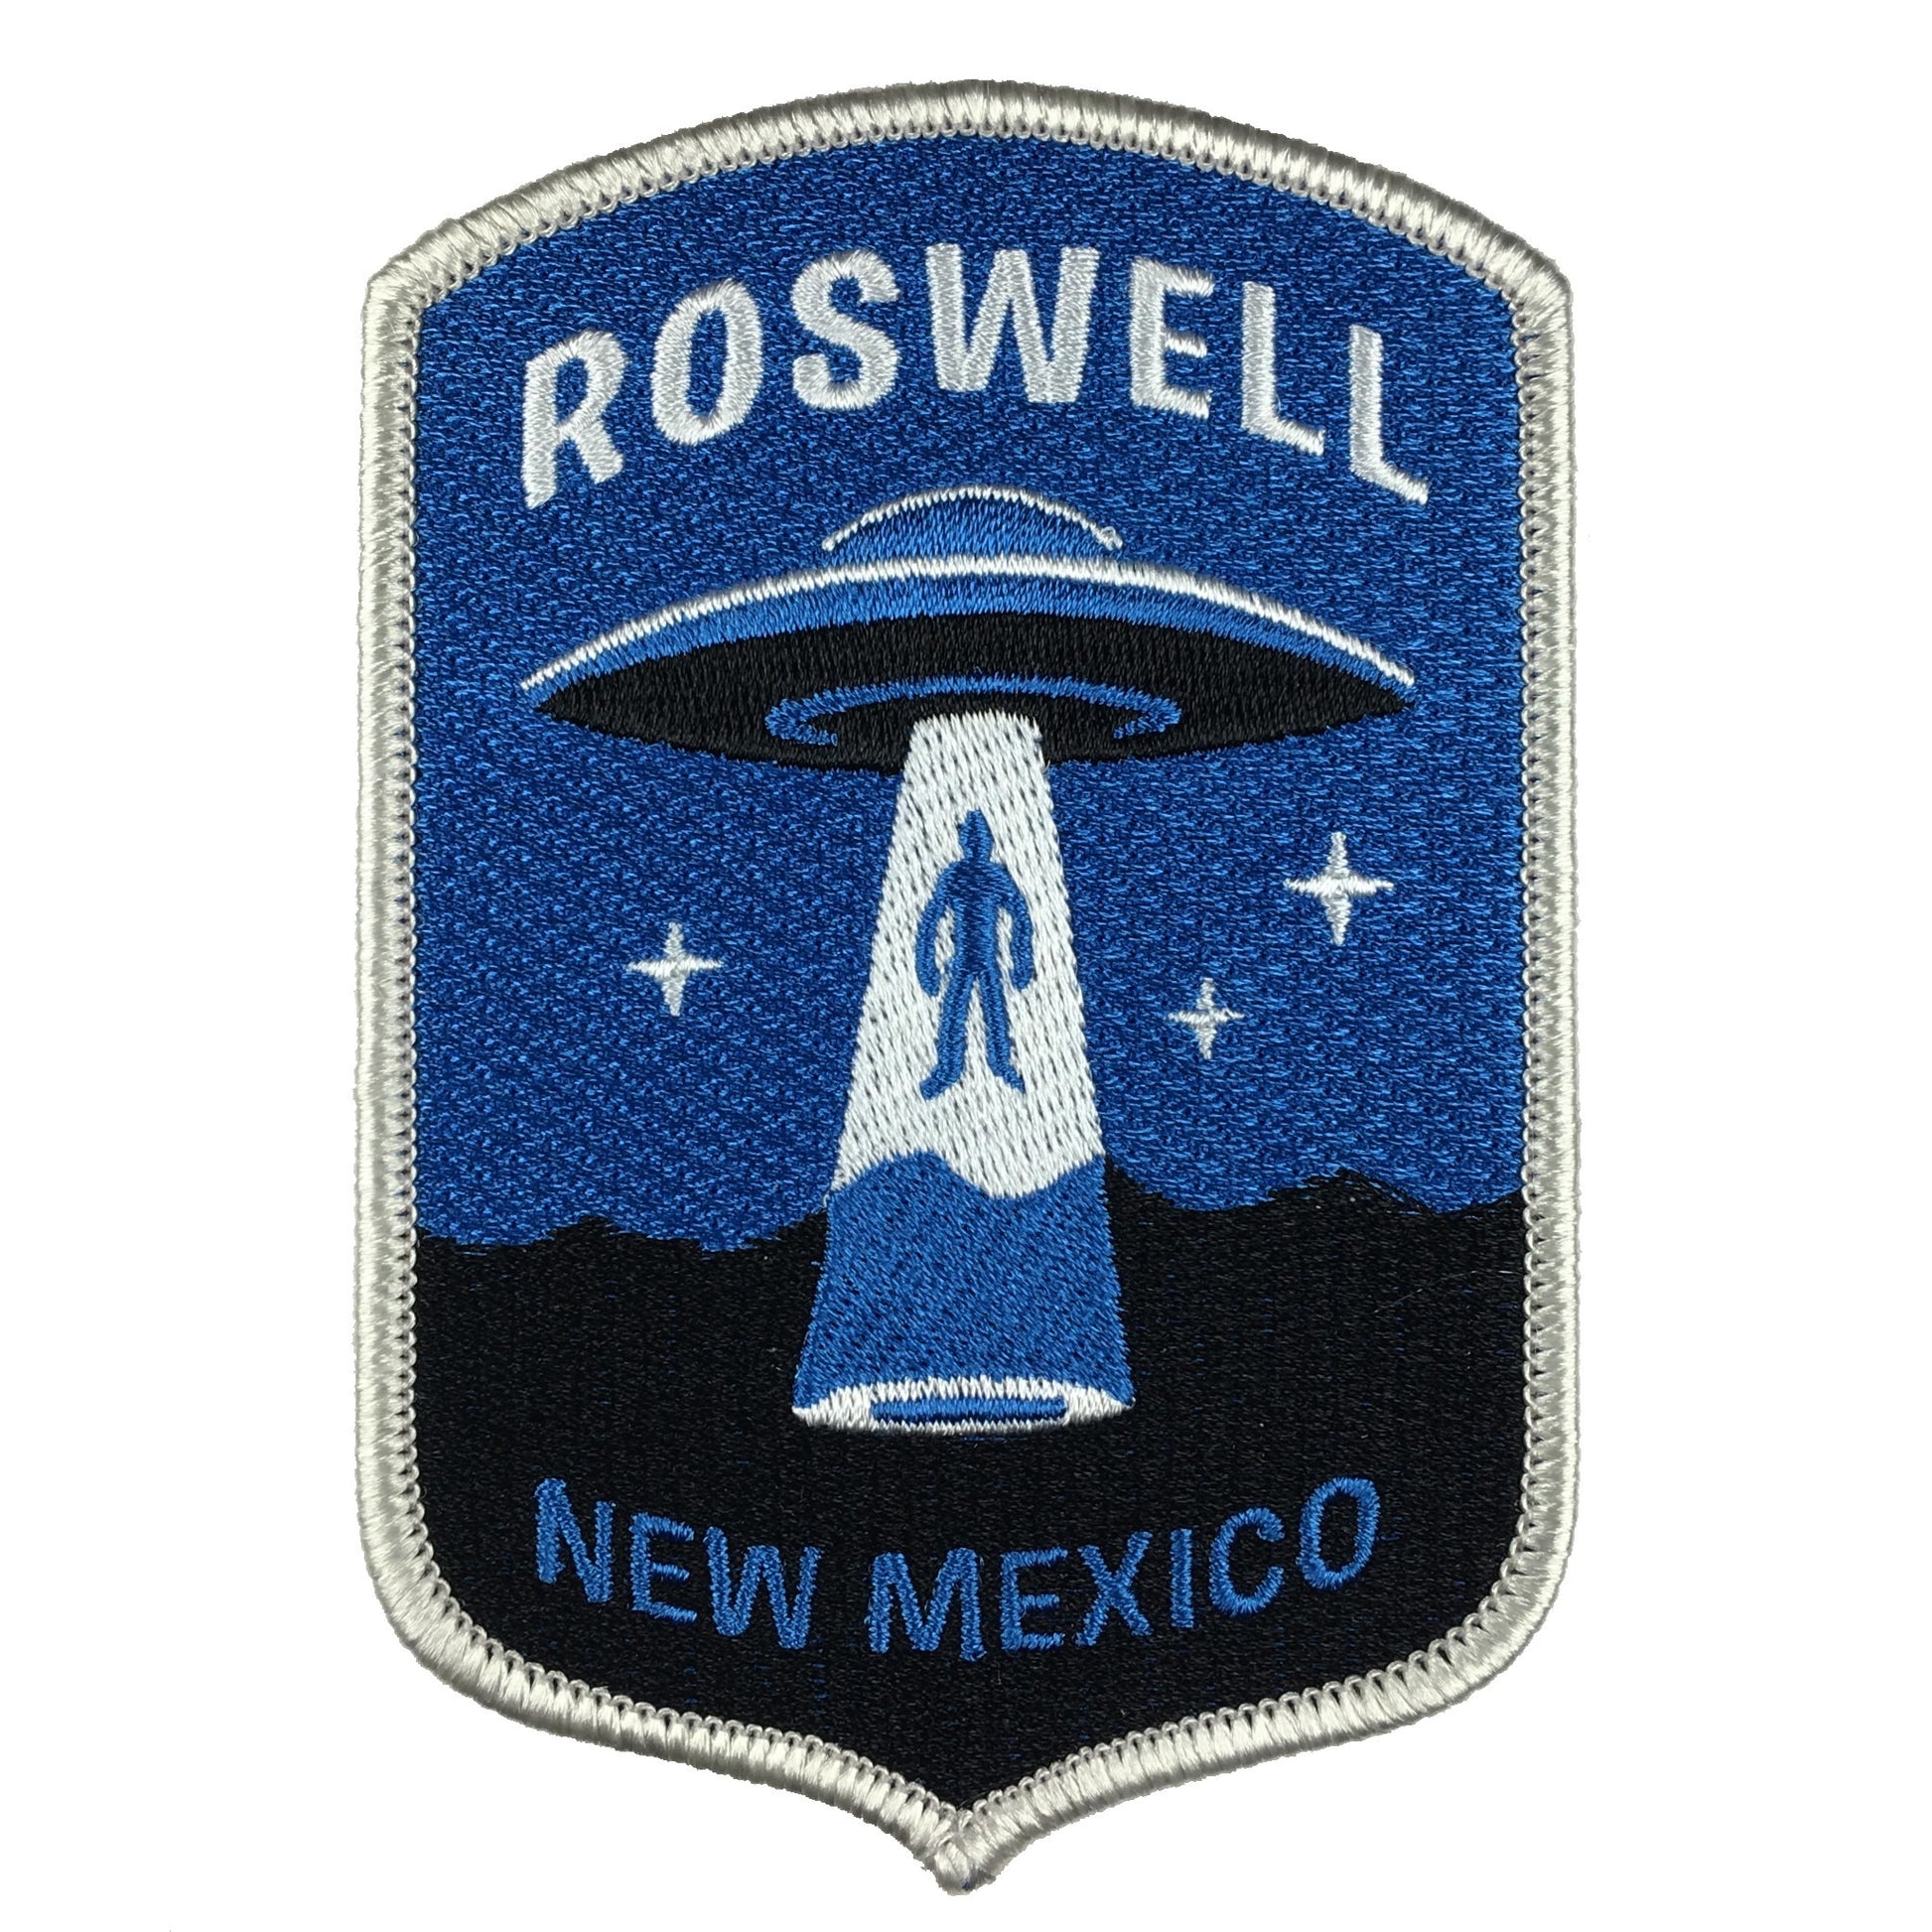 Roswell UFO alien abduction embroidered patch minimalist design by Monsterologist